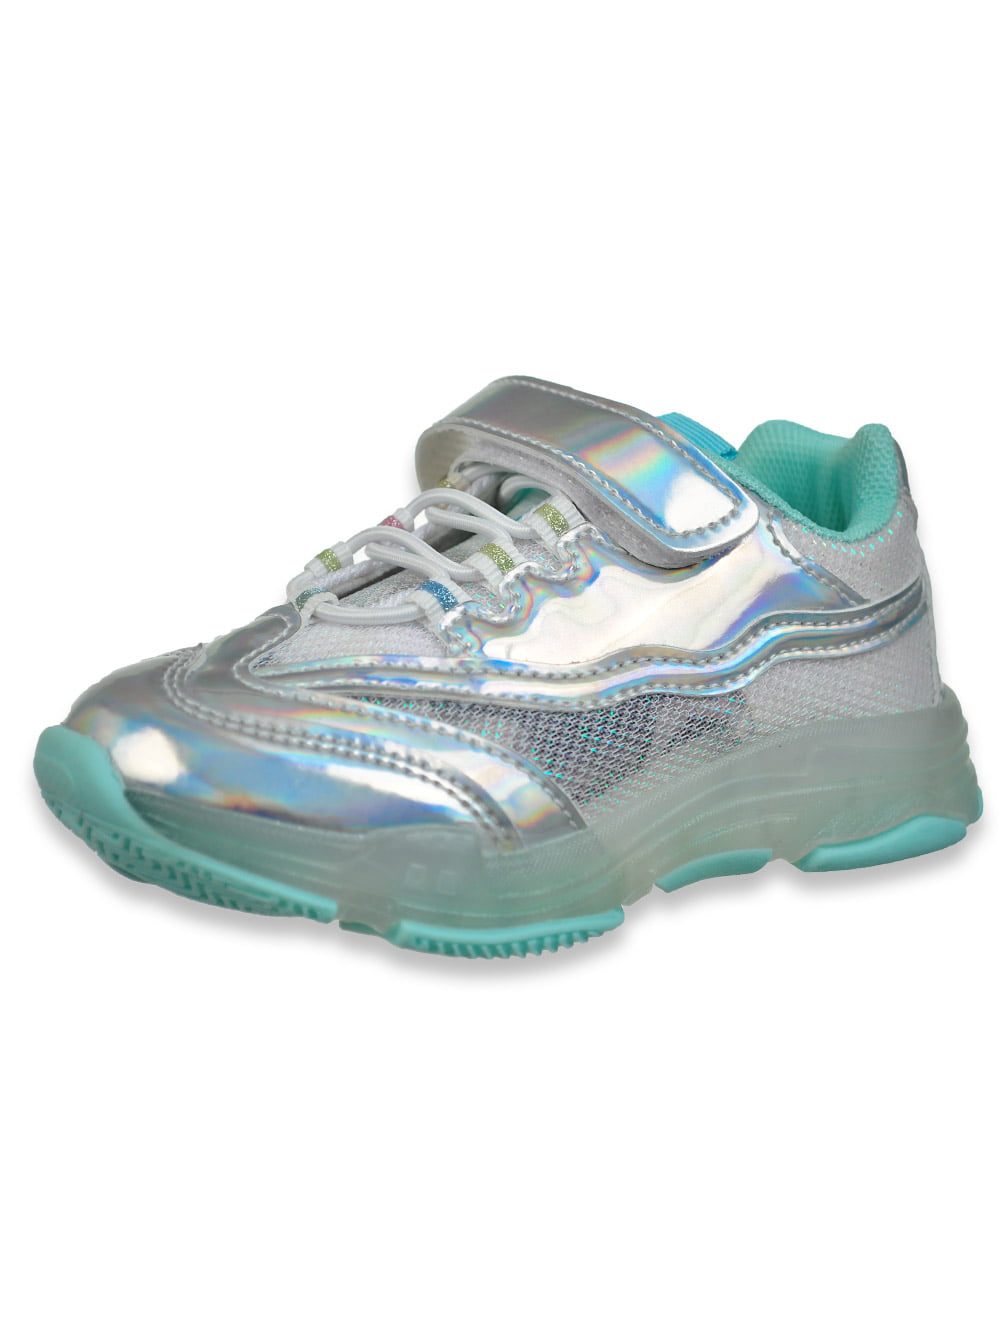 Official Supply Girls' Holo Sneakers - blush/silver, 10 toddler - Walmart.com